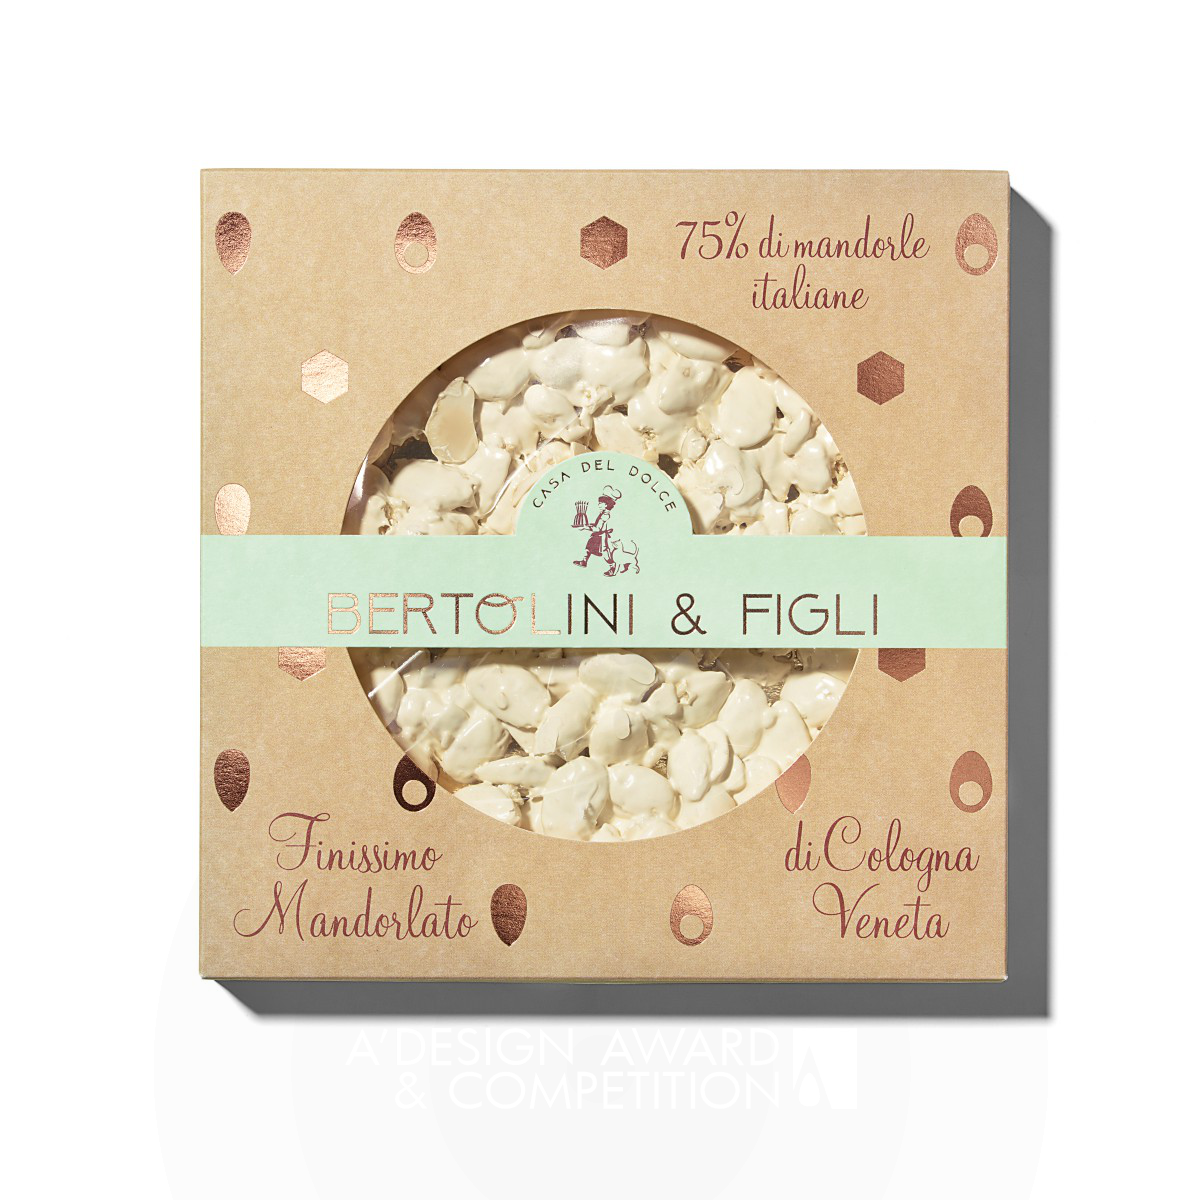 Bertolini and Figli Branding and Packaging Identity by Neom